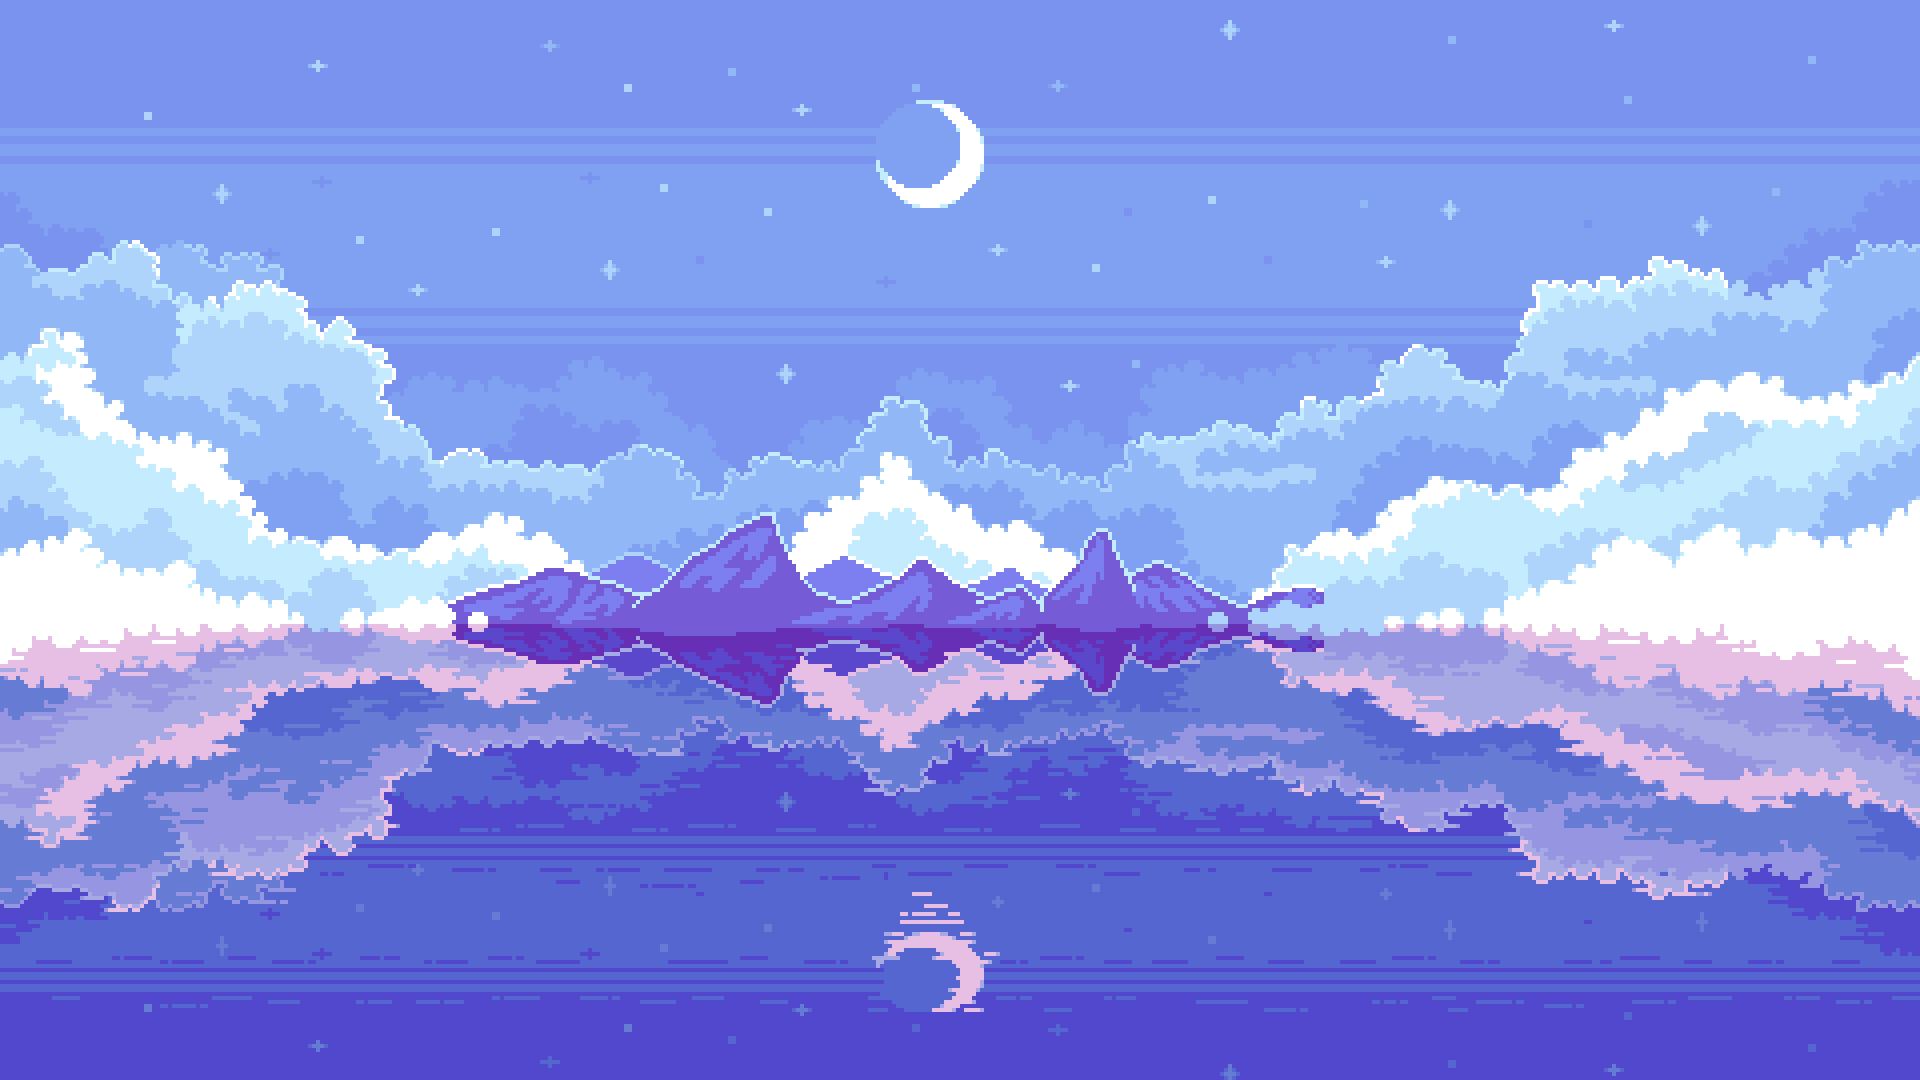 HIRING I can do pixel art Landscapes + Animation for you videogames and background starting at 30$. Dm for Info!